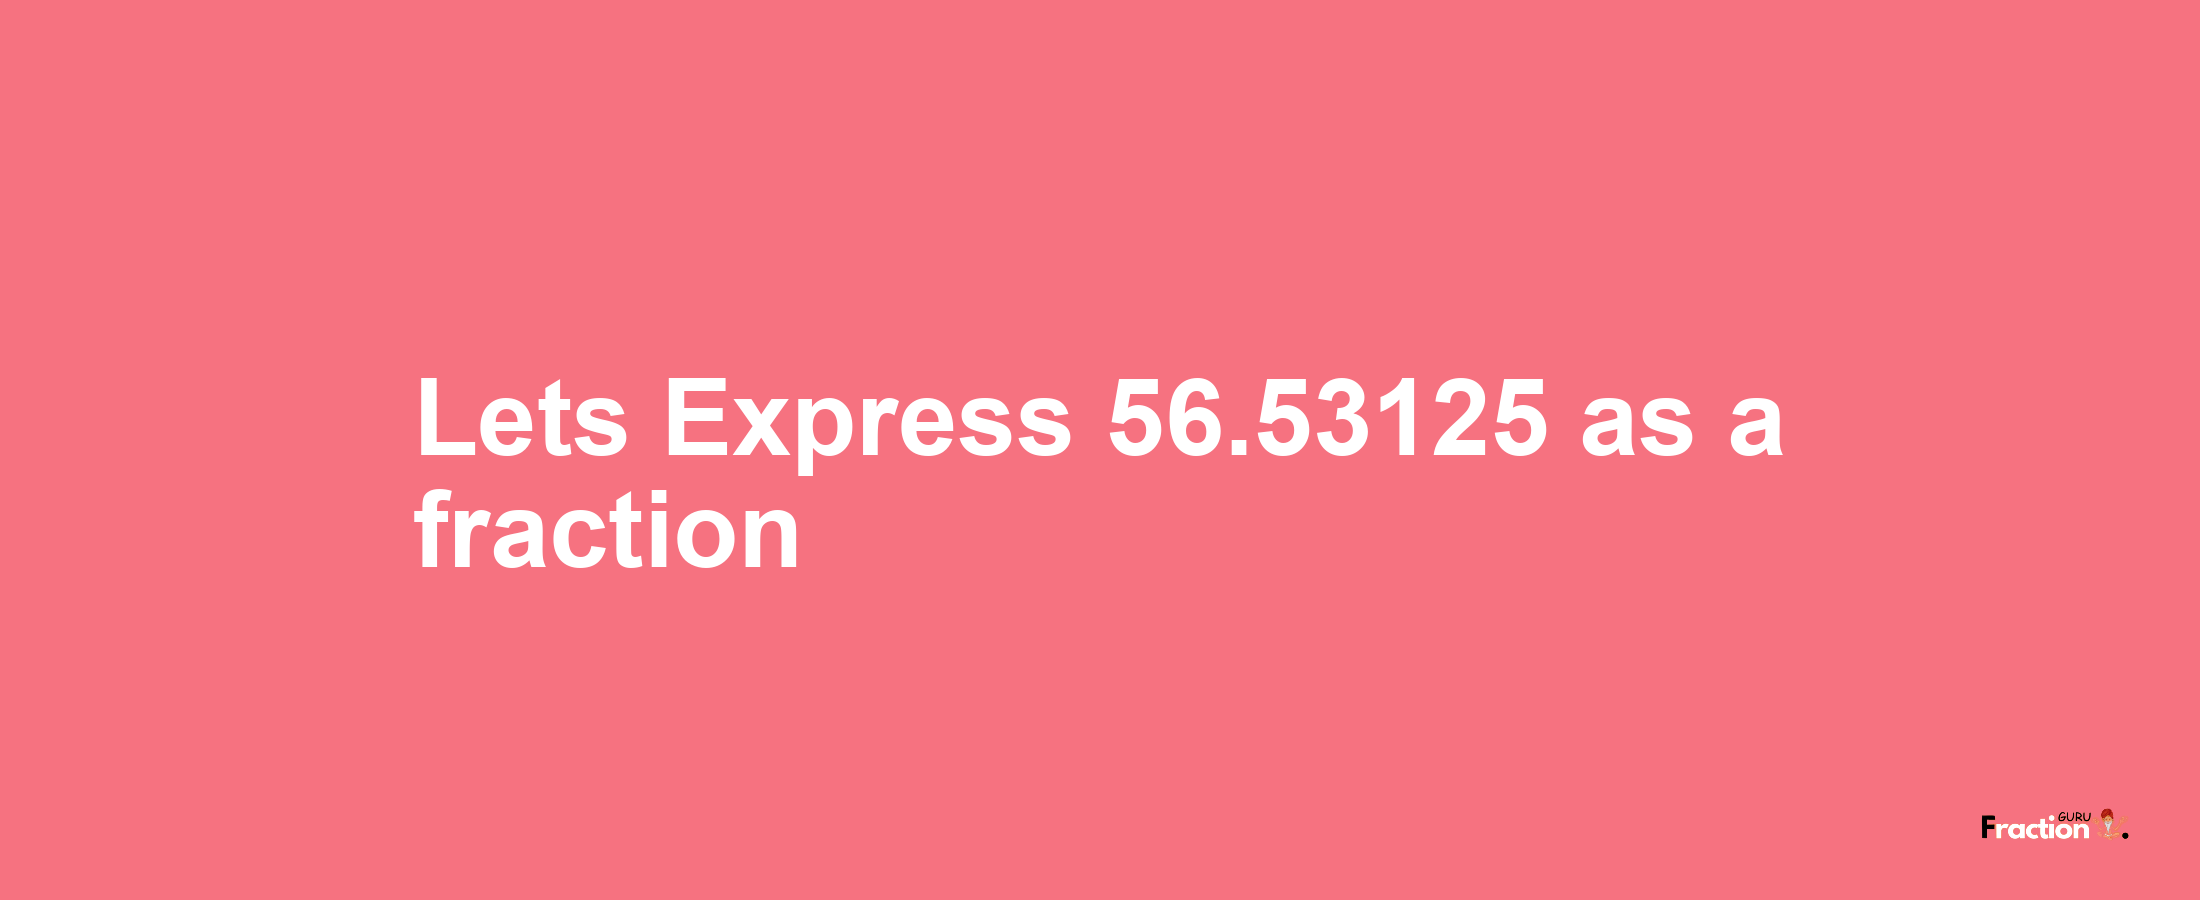 Lets Express 56.53125 as afraction